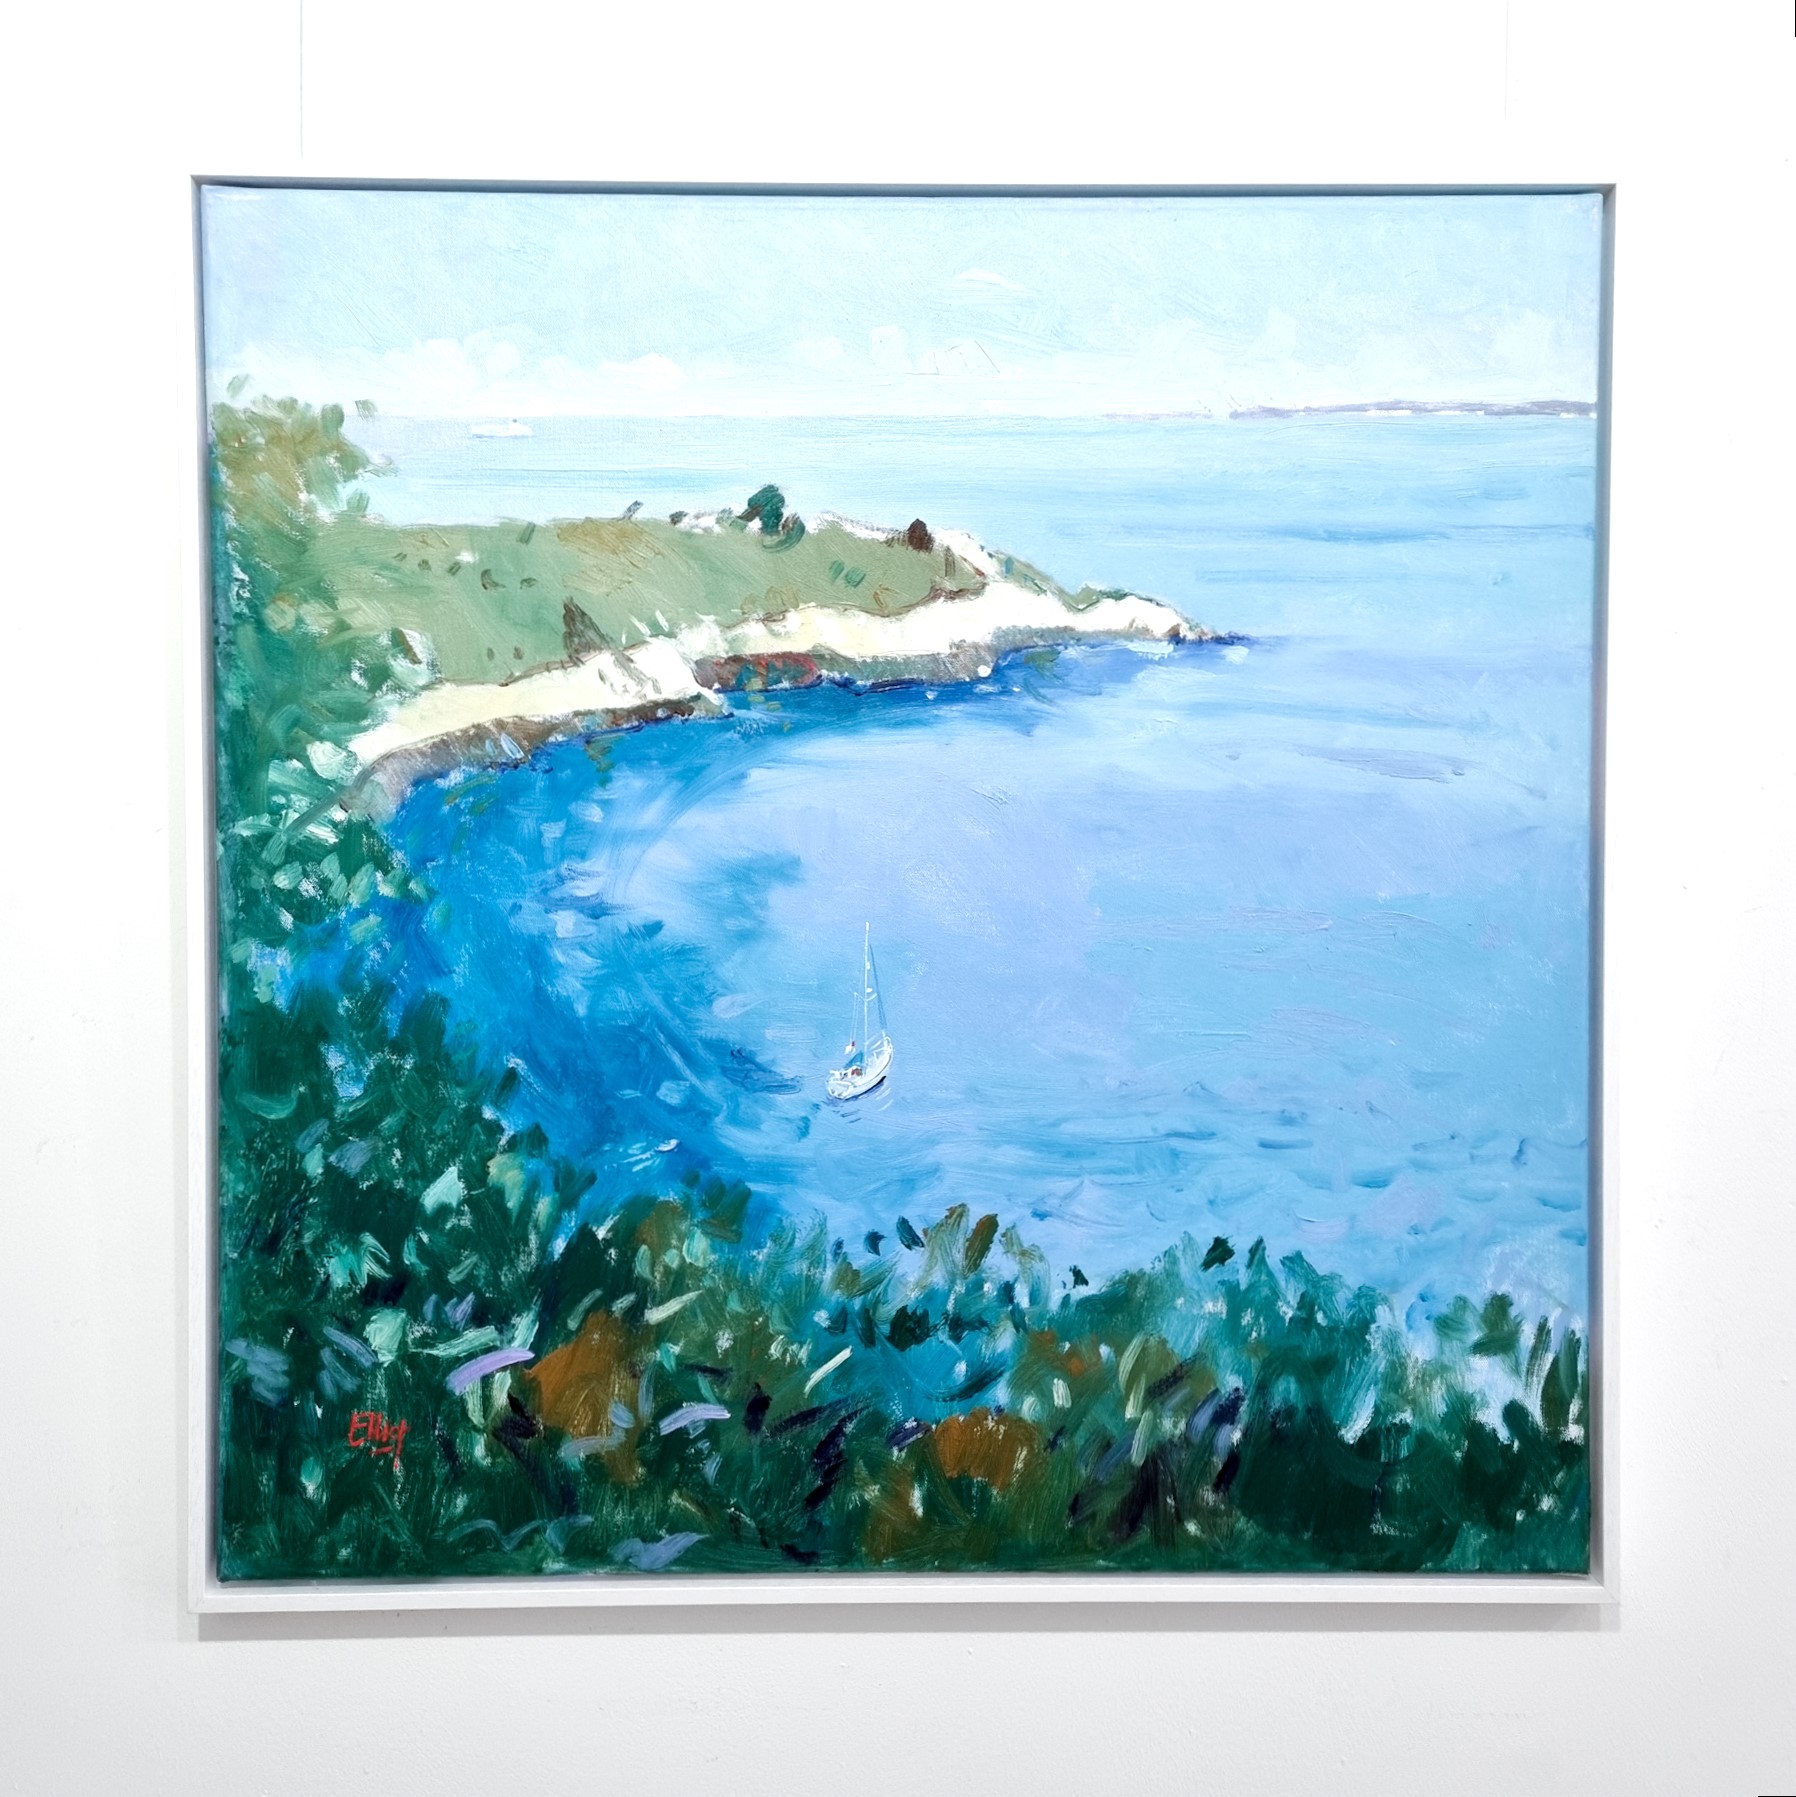 'Soldiers’ Bay View, Guernsey' by artist Ian Elliot